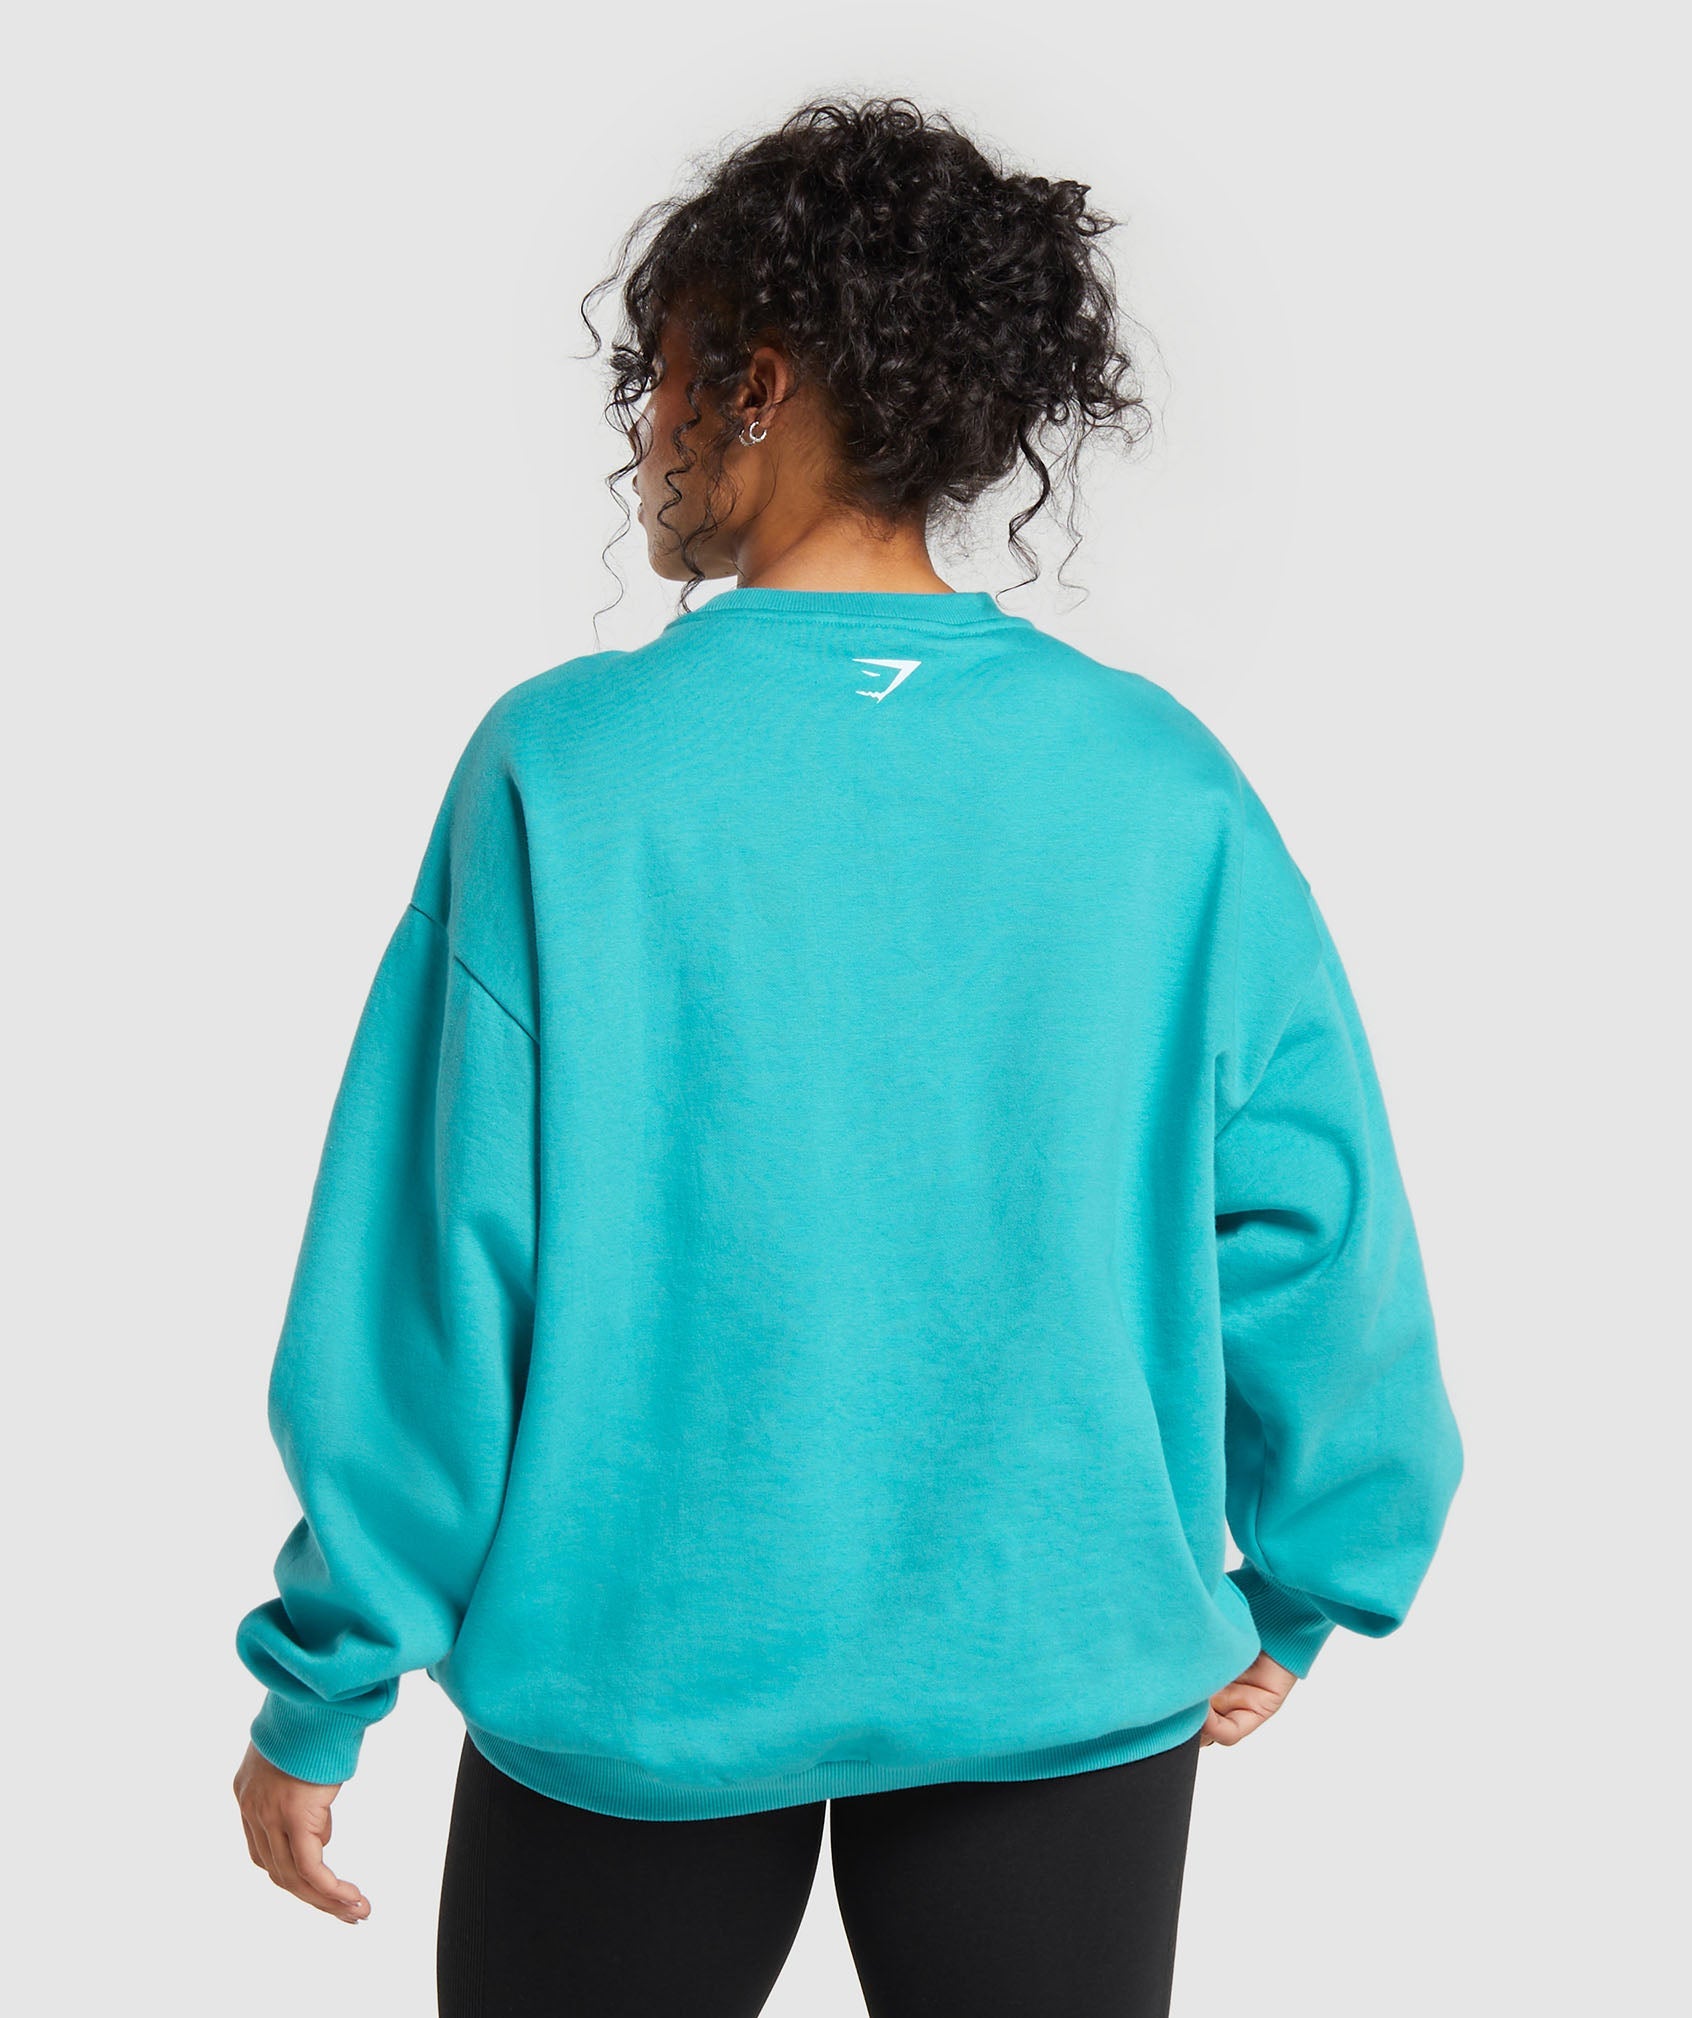 Strength & Conditioning Oversized Sweatshirt in Artificial Teal - view 2